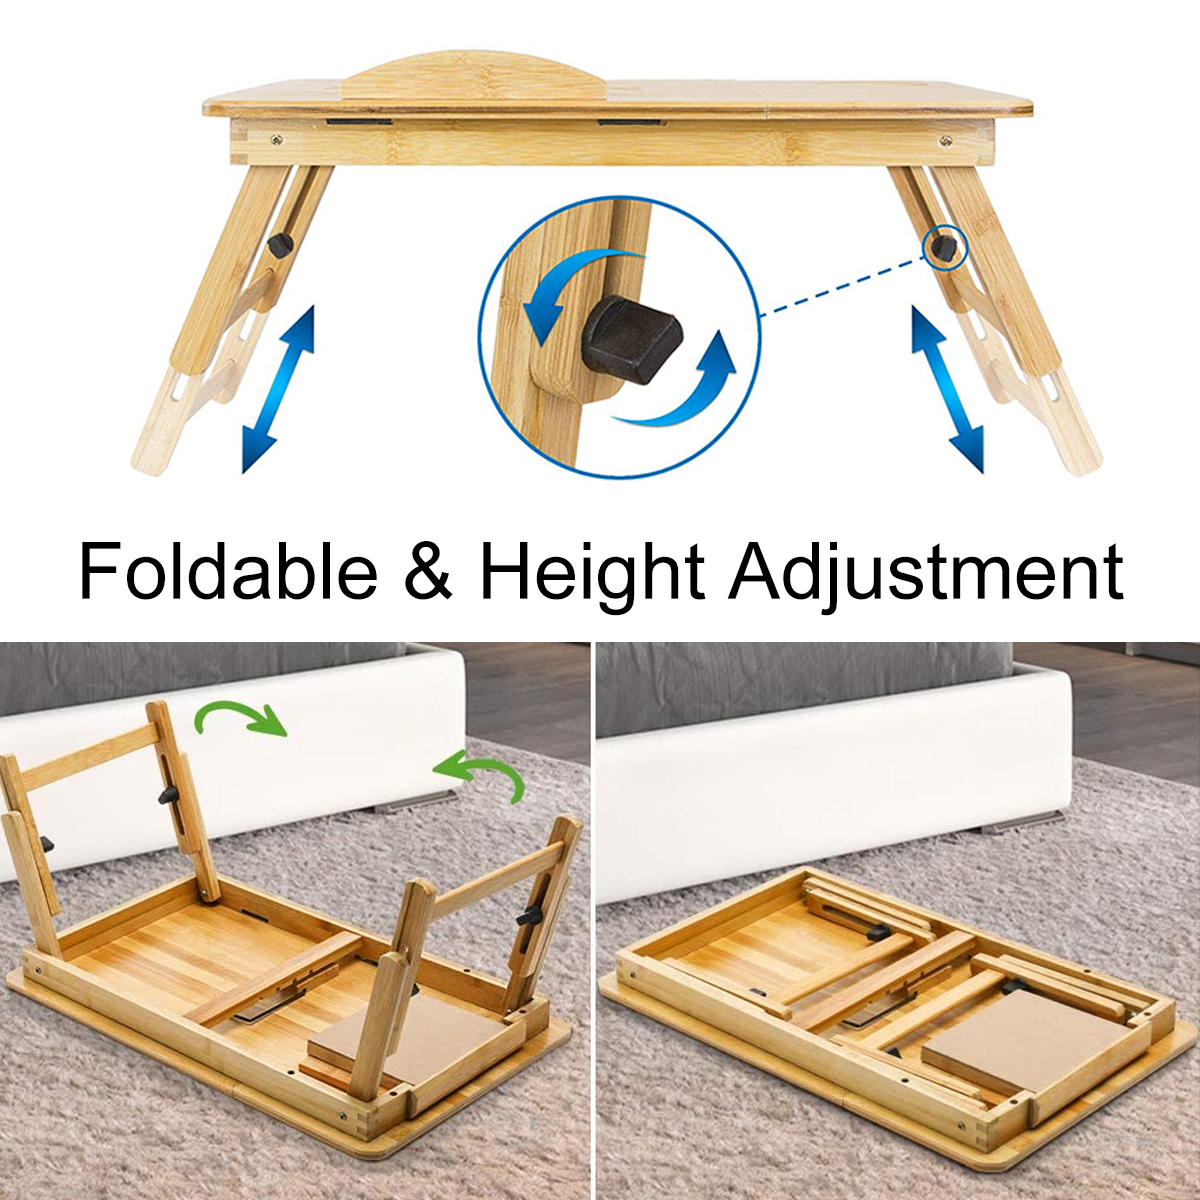 Foldable-Laptop-Desk-Portable-Height-Adjustable-Computer-Stand-Bamboo-Tea-Serving-Tray-Bed-Dining-Ta-1796097-2